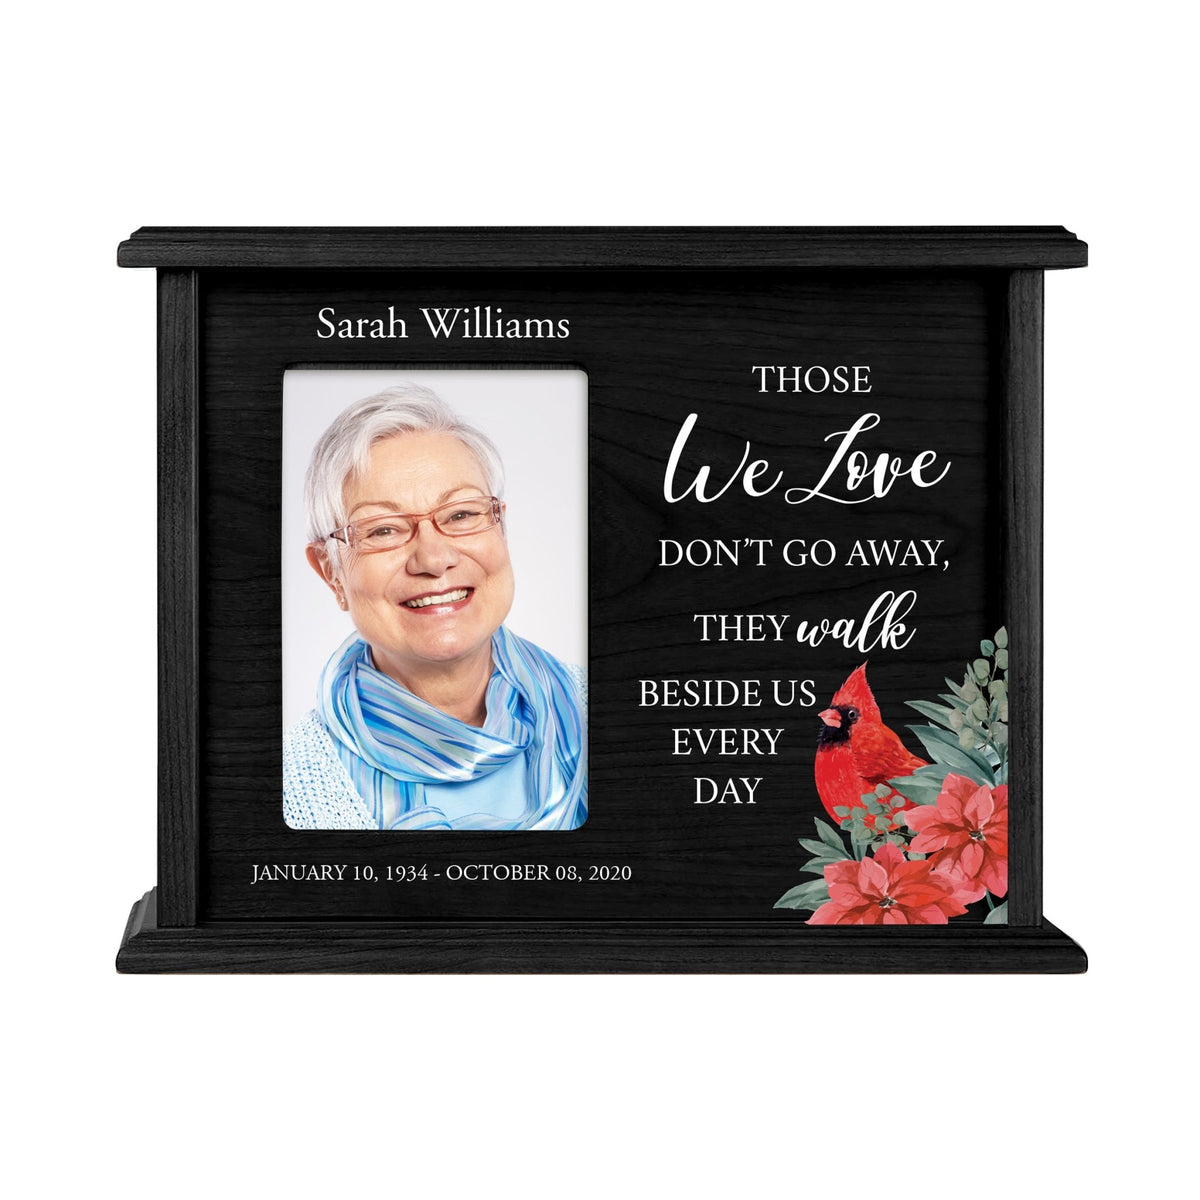 Customized Cardinal Memorial Cremation Urn Wooden Urn Box with 4x6 Photo holds 200 cu in Those We Love - LifeSong Milestones